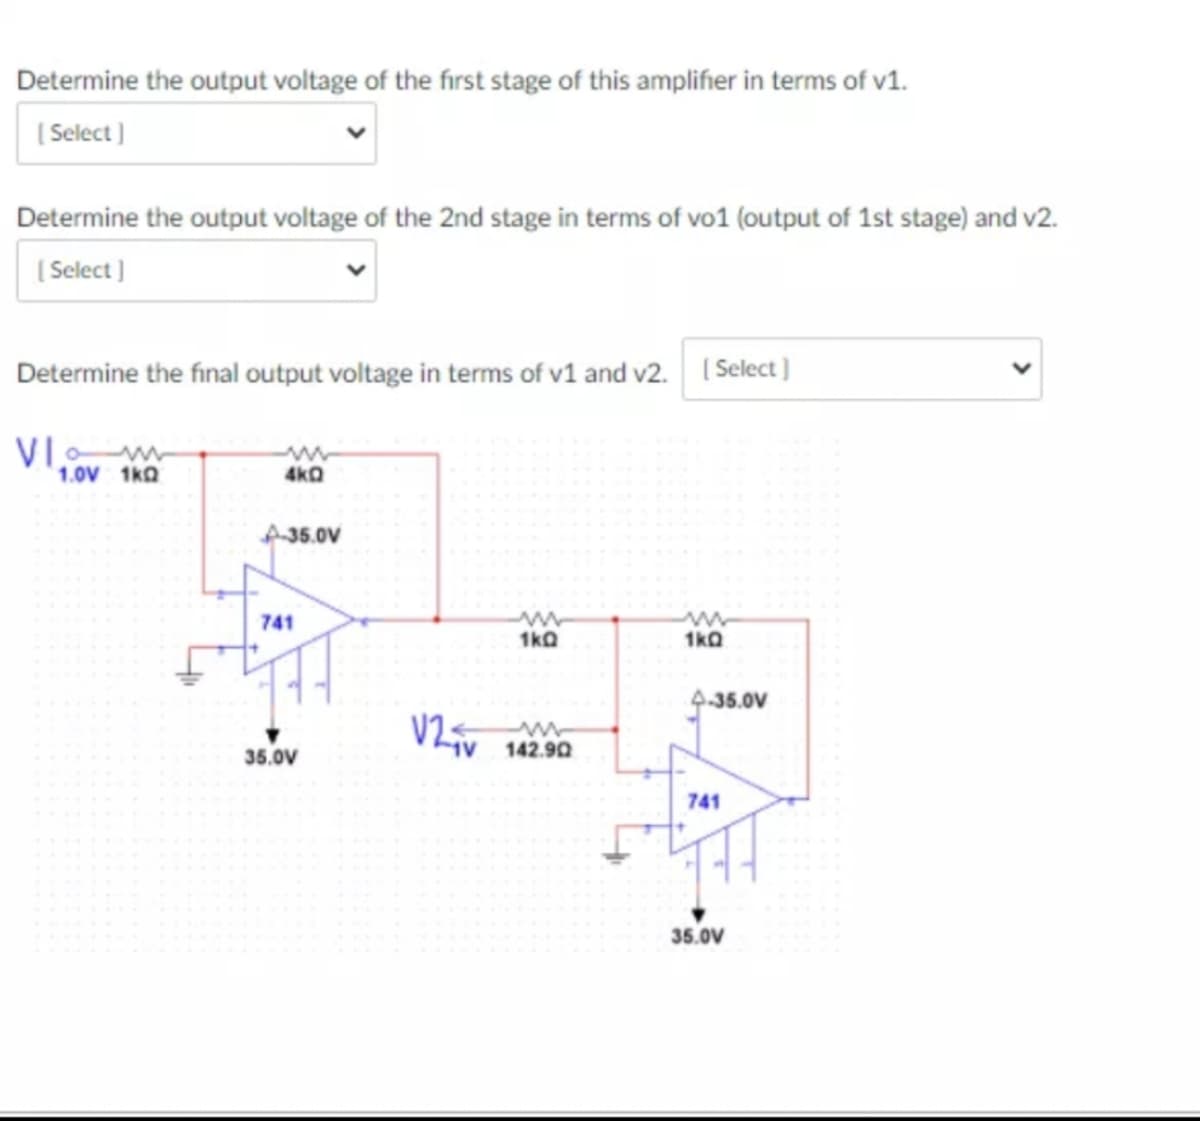 Determine the output voltage of the first stage of this amplifher in terms of v1.
( Select )
Determine the output voltage of the 2nd stage in terms of vo1 (output of 1st stage) and v2.
( Select ]
Determine the final output voltage in terms of v1 and v2. ( Select)
VI w
1.0V 1kQ
4kQ
A35.0V
741
1kQ
1kQ
9-35.0V
35.0V
142.90
741
35.0V
